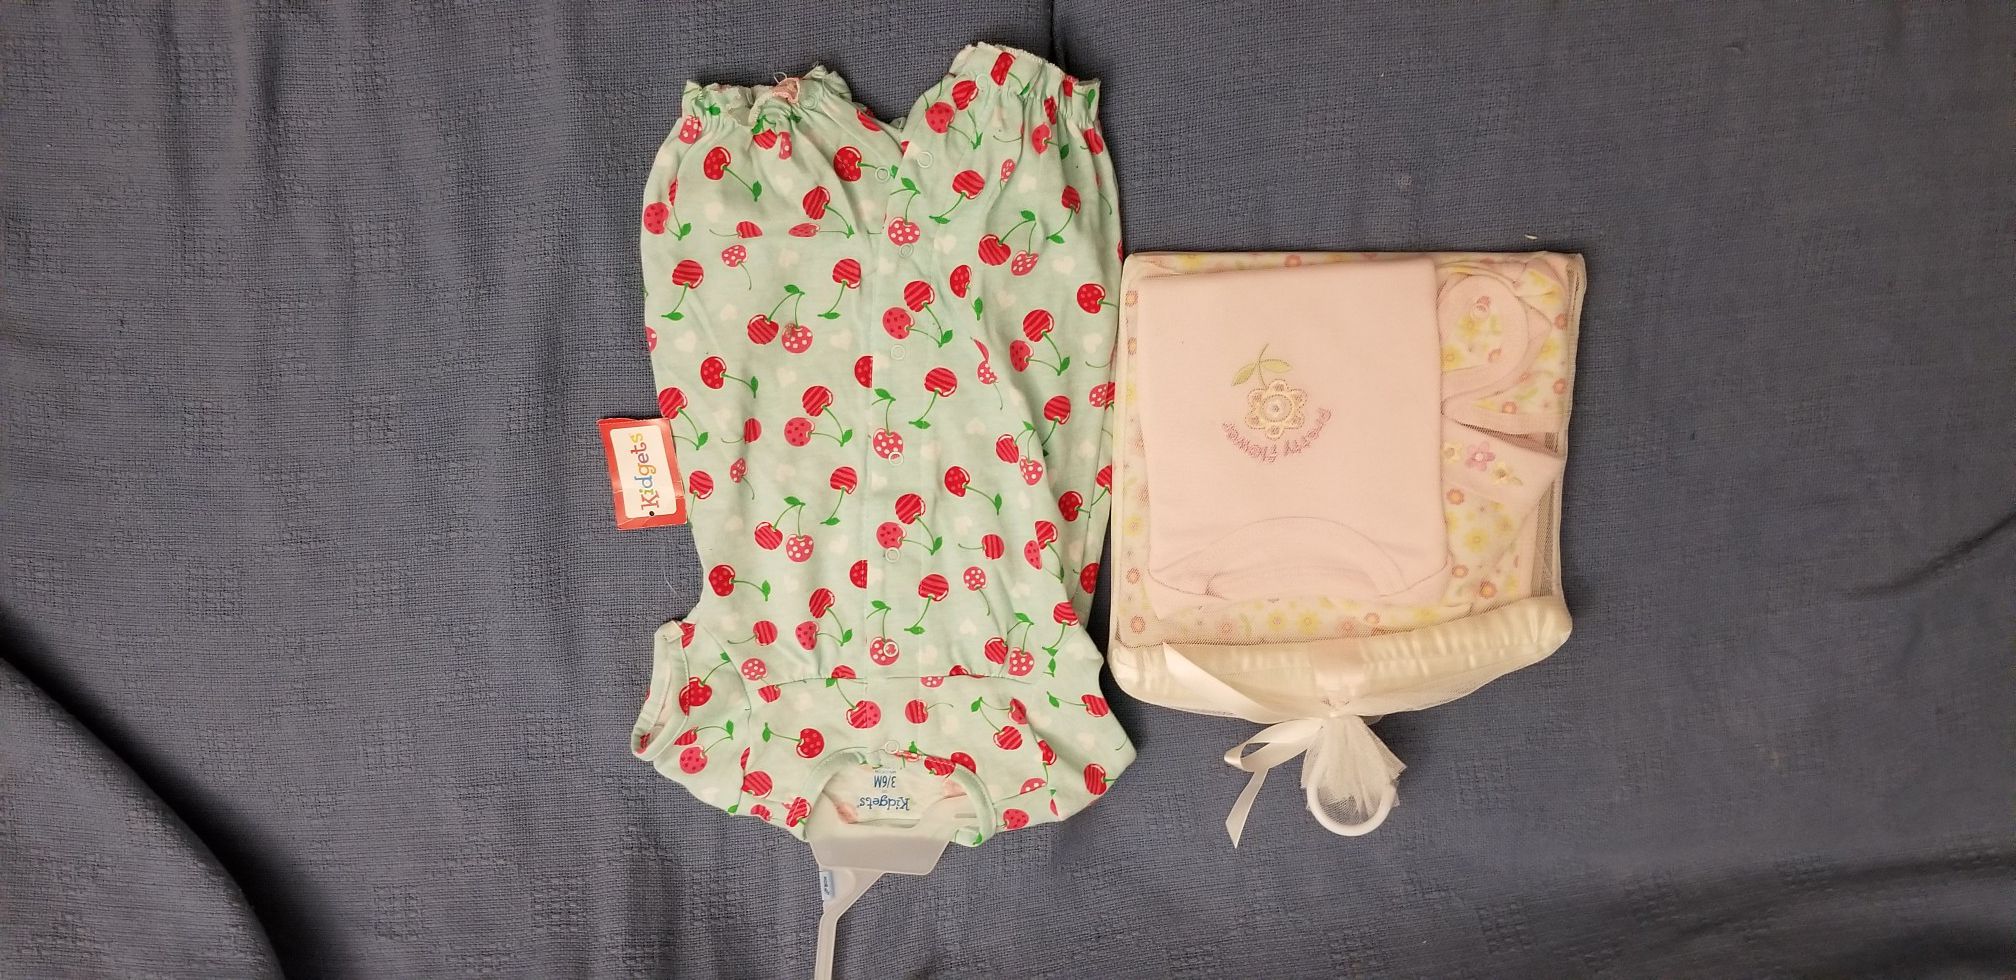 Baby clothes new with tag